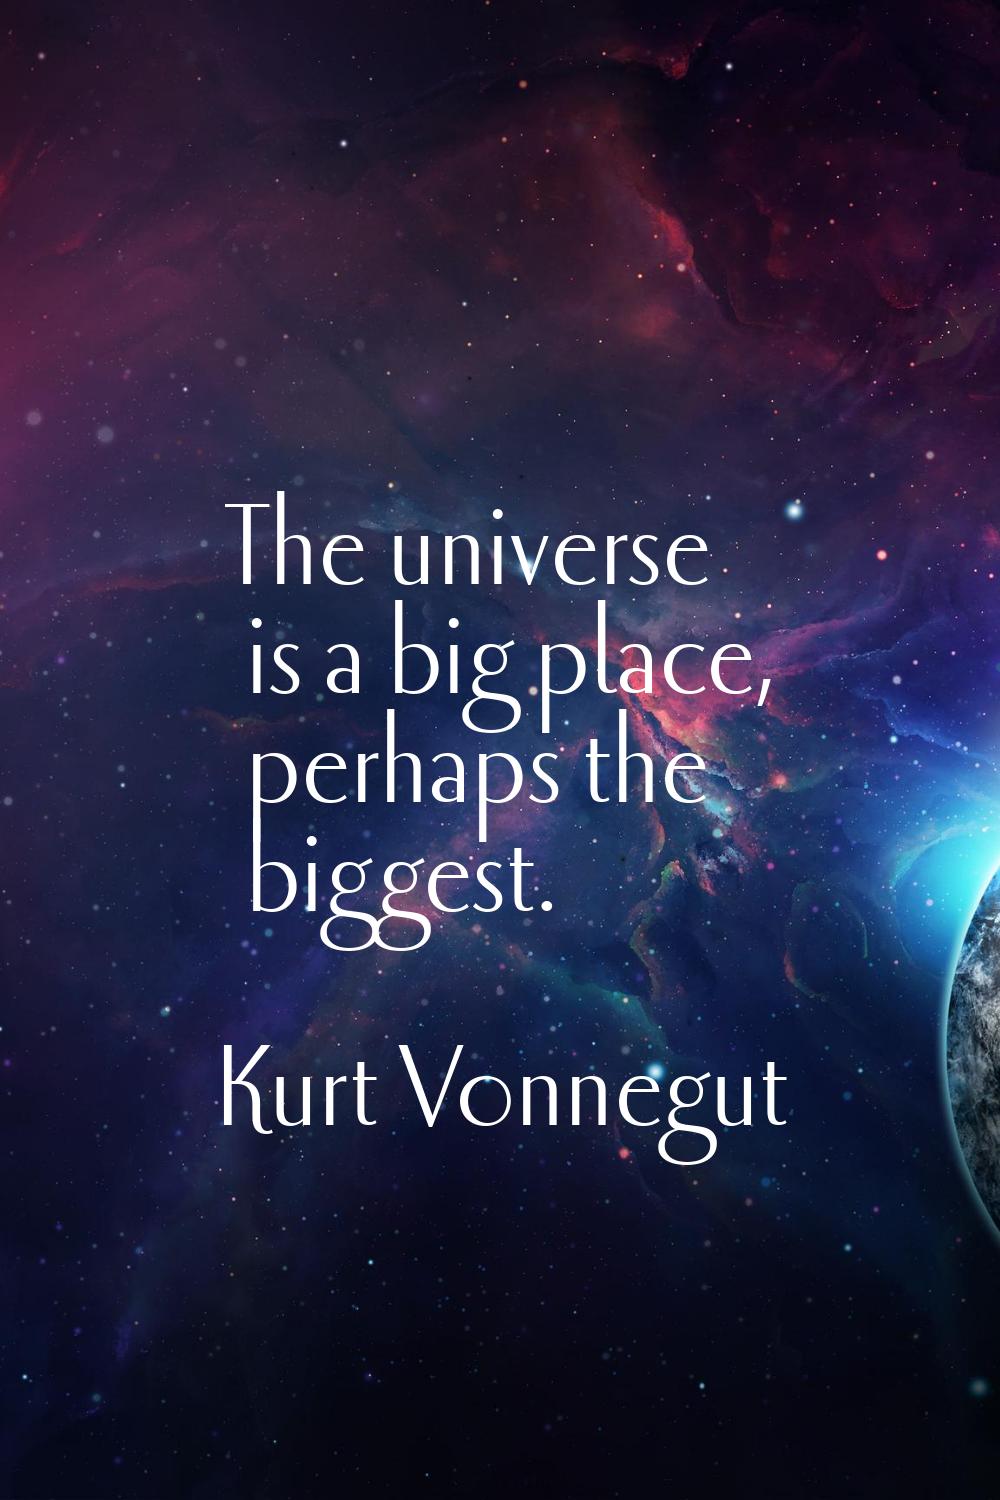 The universe is a big place, perhaps the biggest.